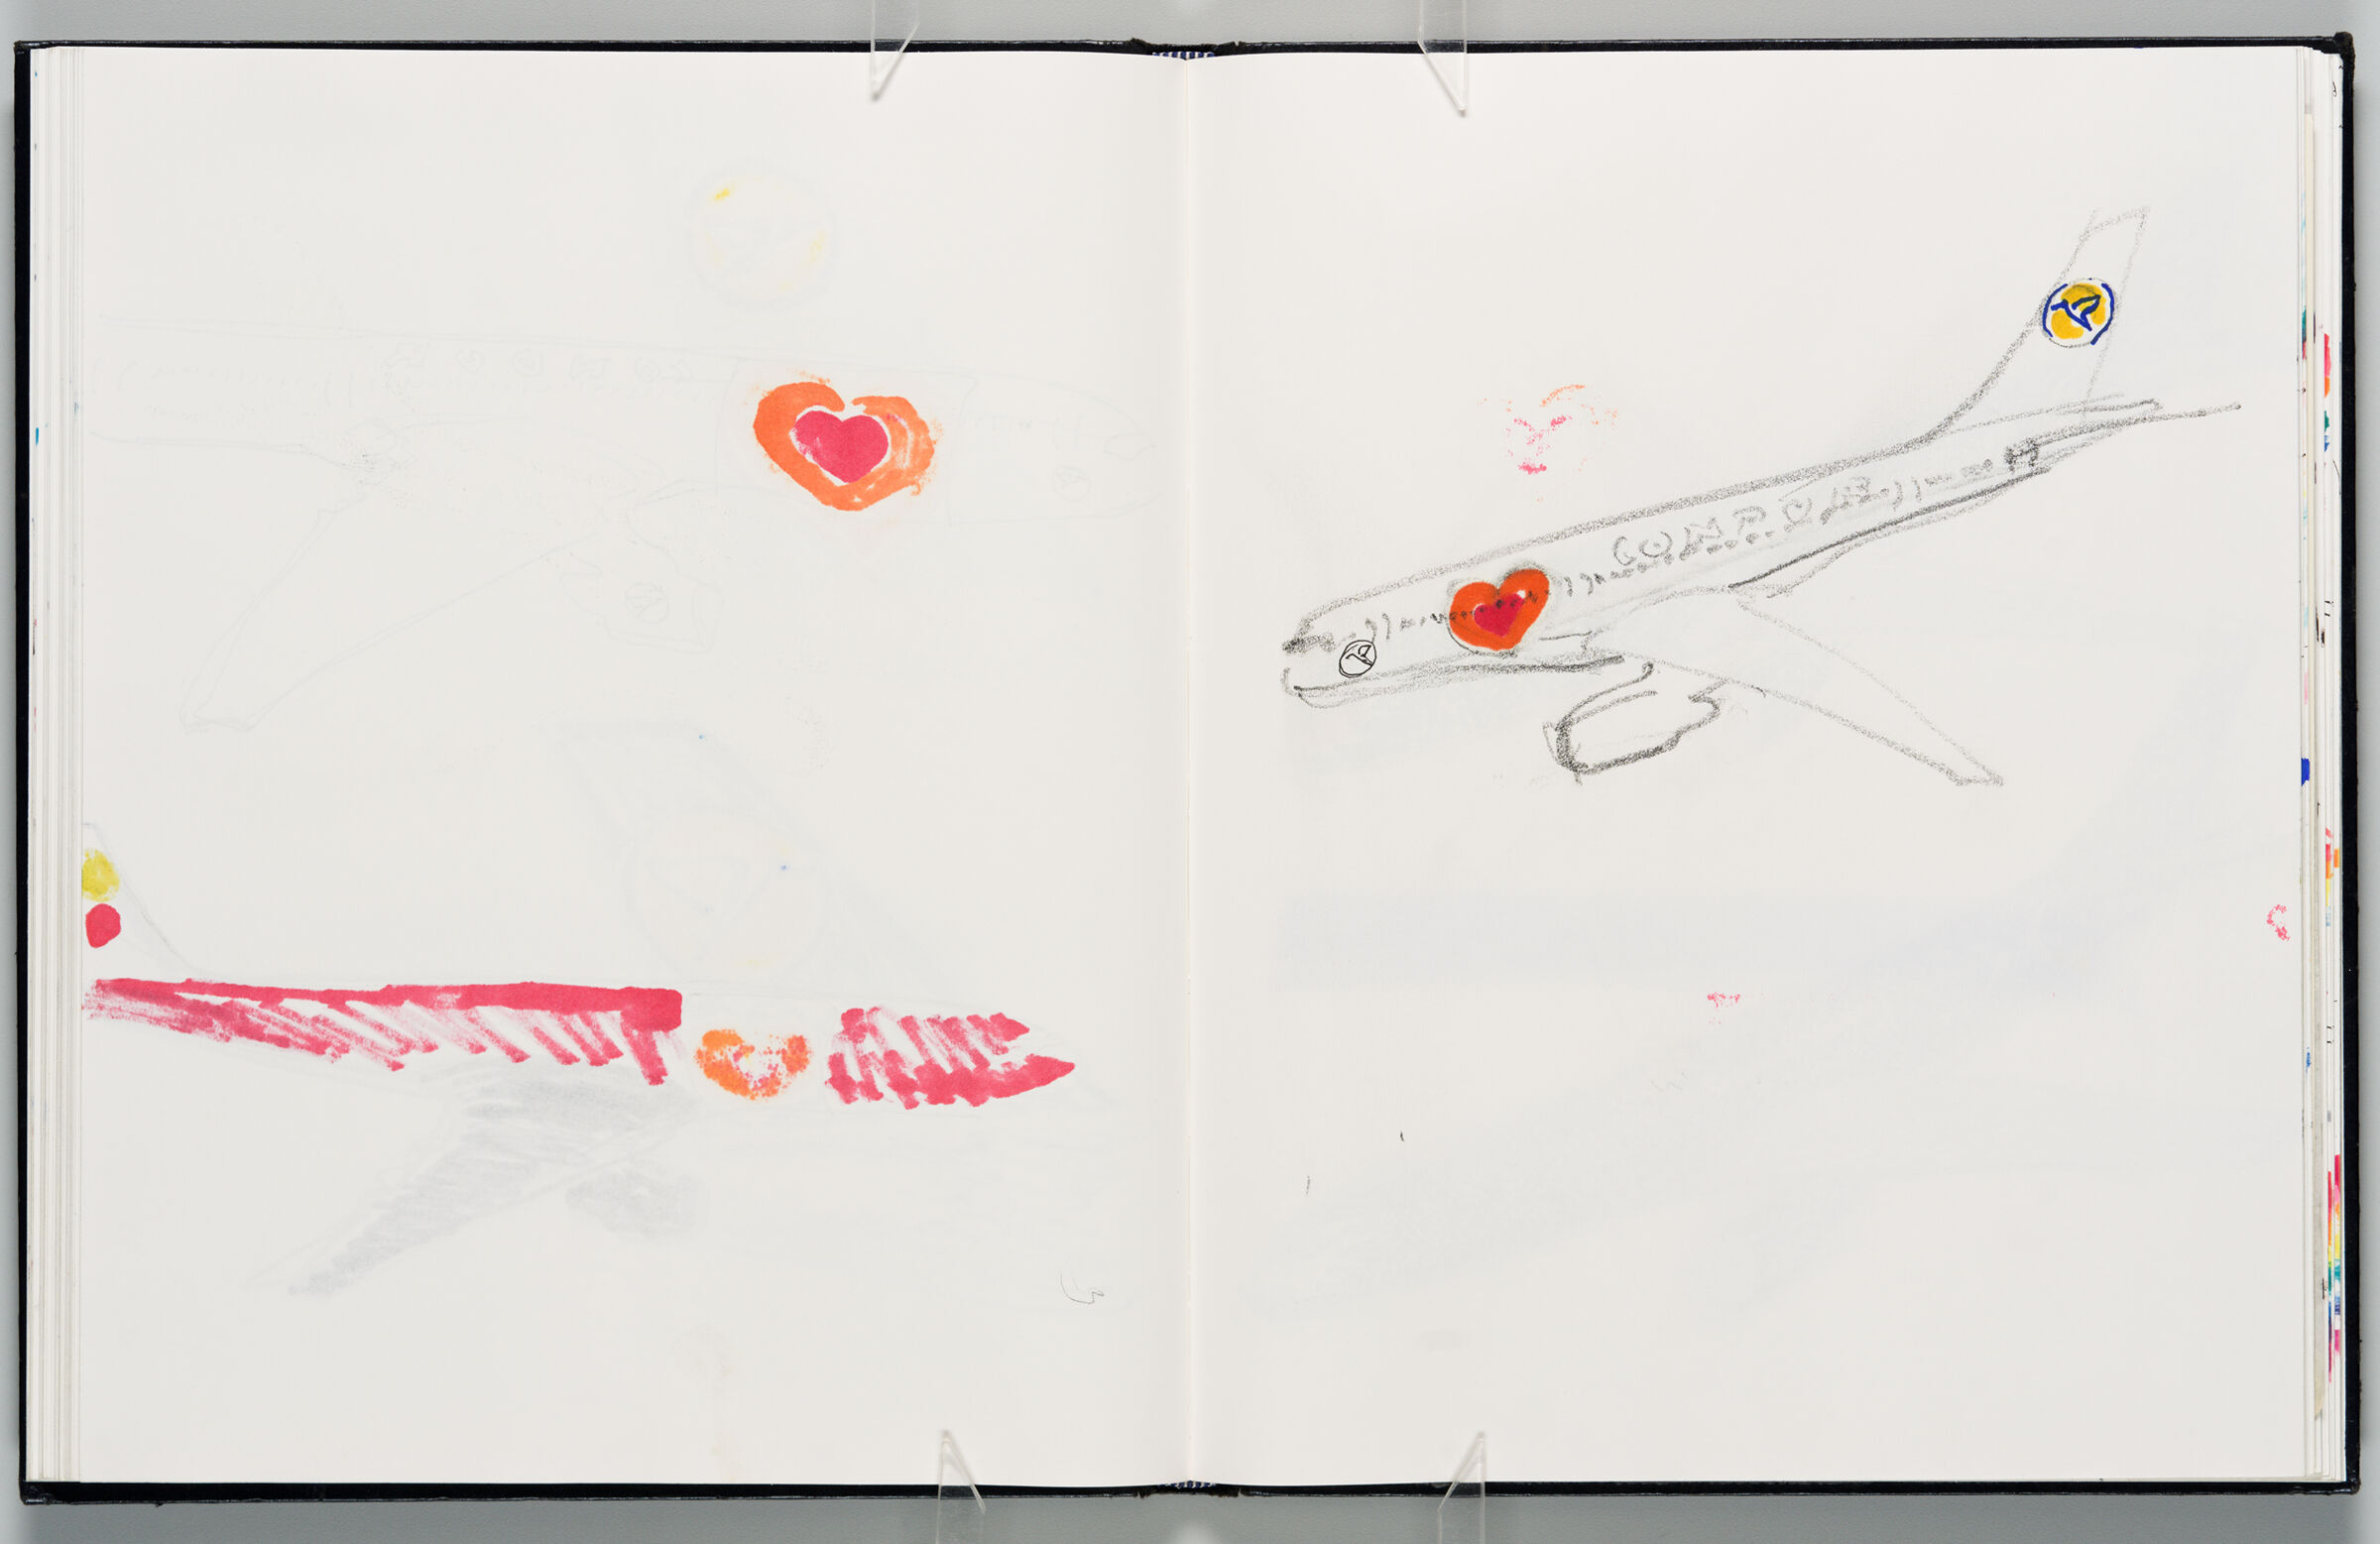 Untitled (Bleed-Through Of Previous Page, Left Page); Untitled (Heart Design For Condor Planes, Right Page)